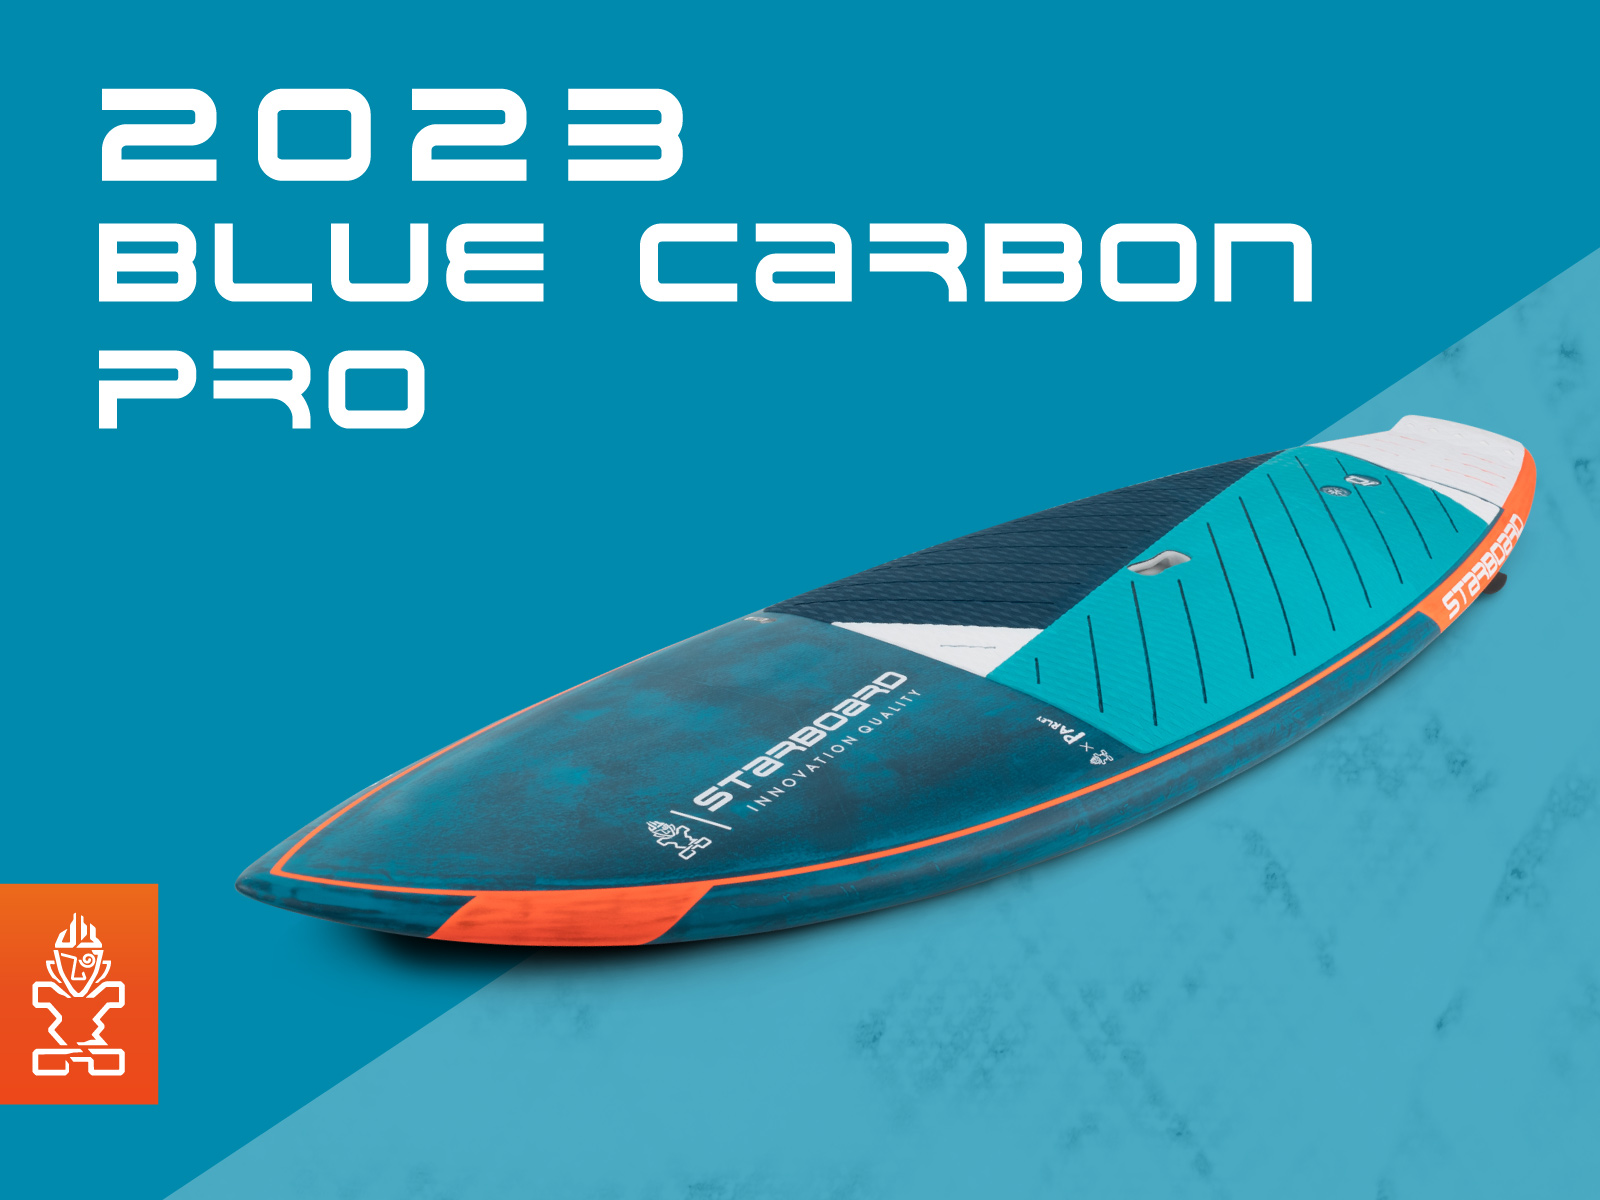 2023 Blue Carbon Pro Construction » Starboard SUP